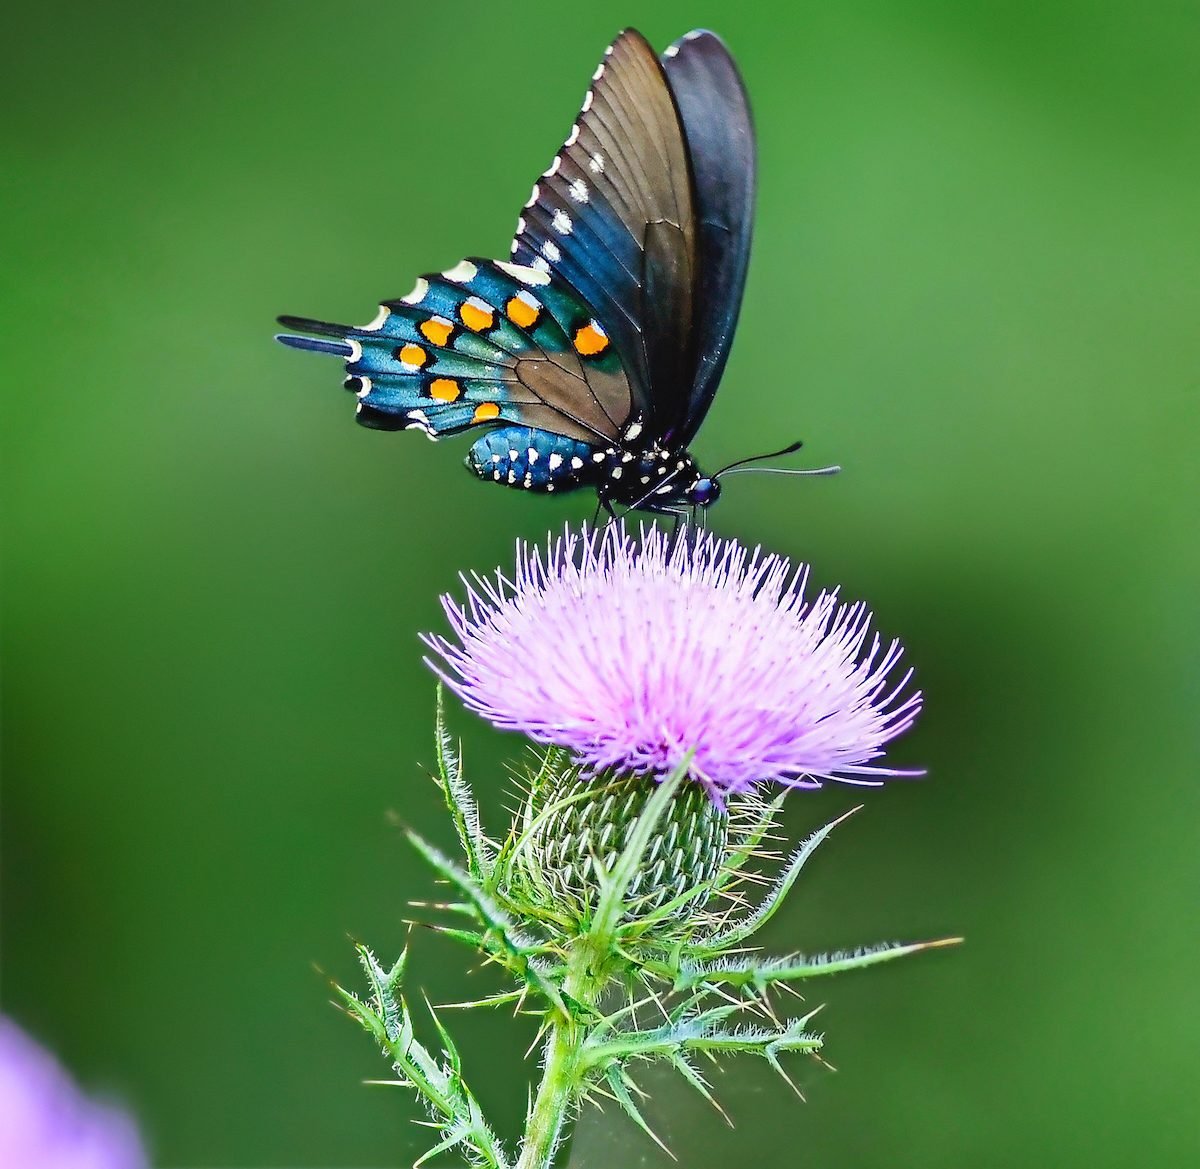 Attract Pipevine Swallowtail Butterflies to Your Garden